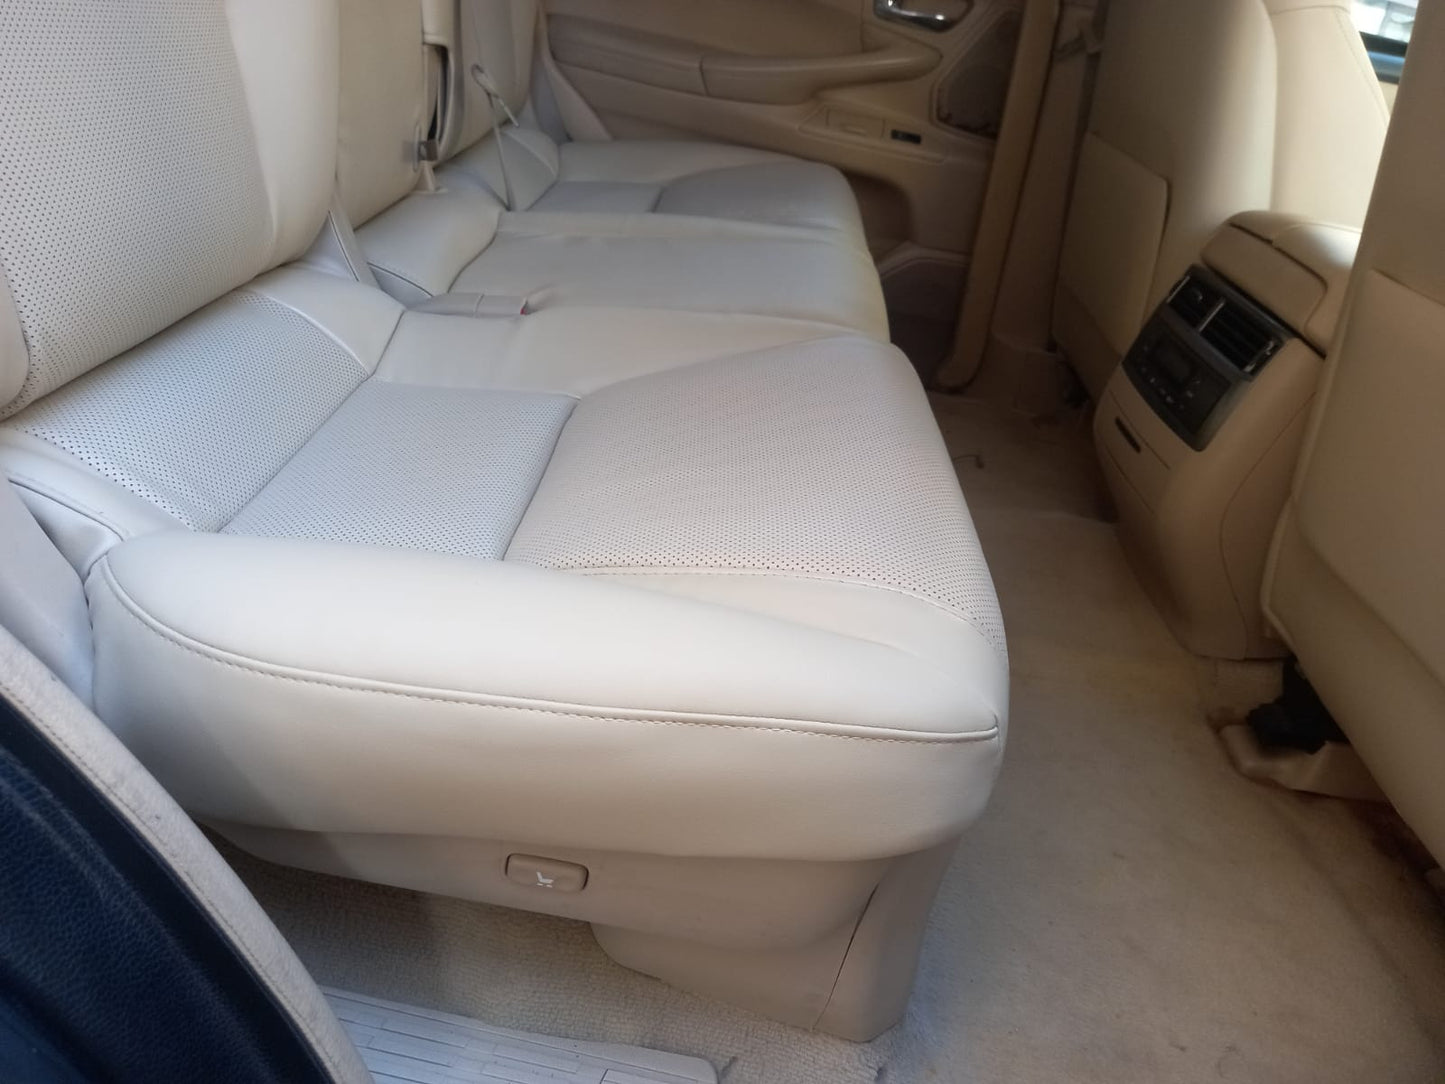 Lexus LX570 Land Cruiser (Year: 2008-2015) Synthetic leather Seat cover (Front & Rear Seat covers, full set 3 lines)